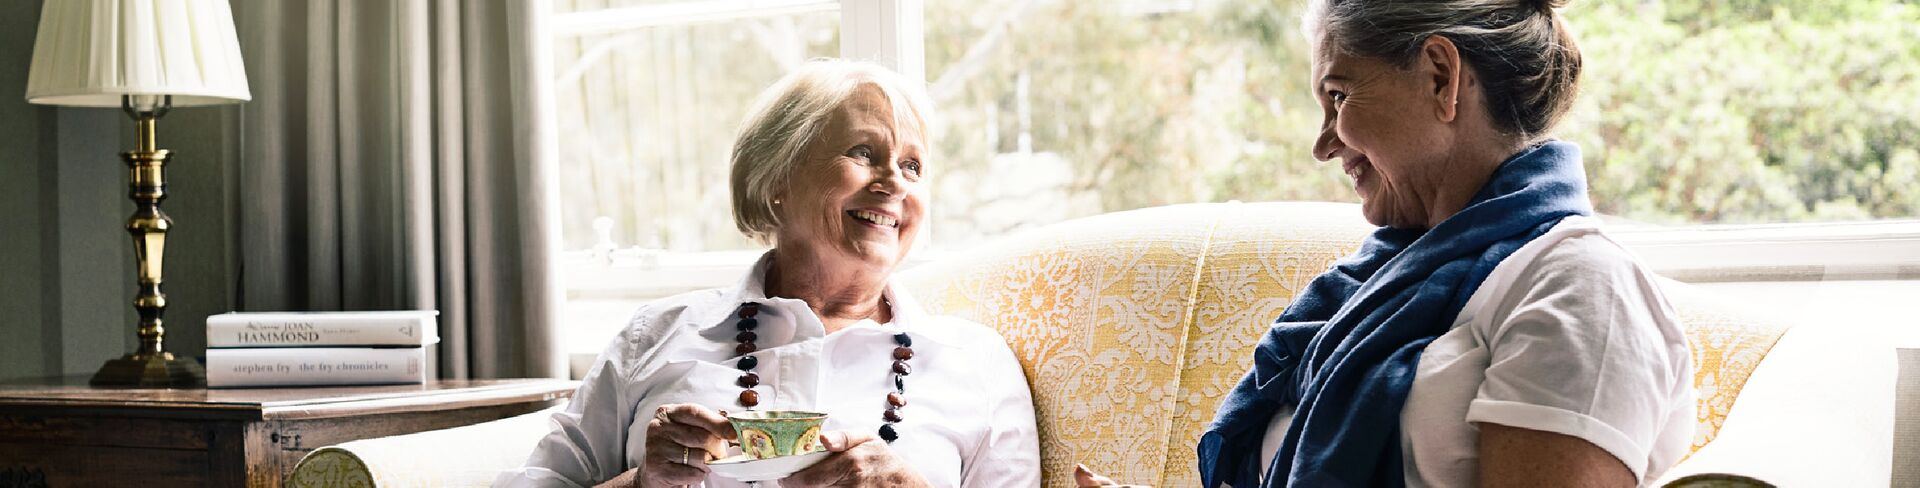 Two women sit on a yellow and white lace-patterned couch and looking at each other, enjoying a cup of tea and a chat. 